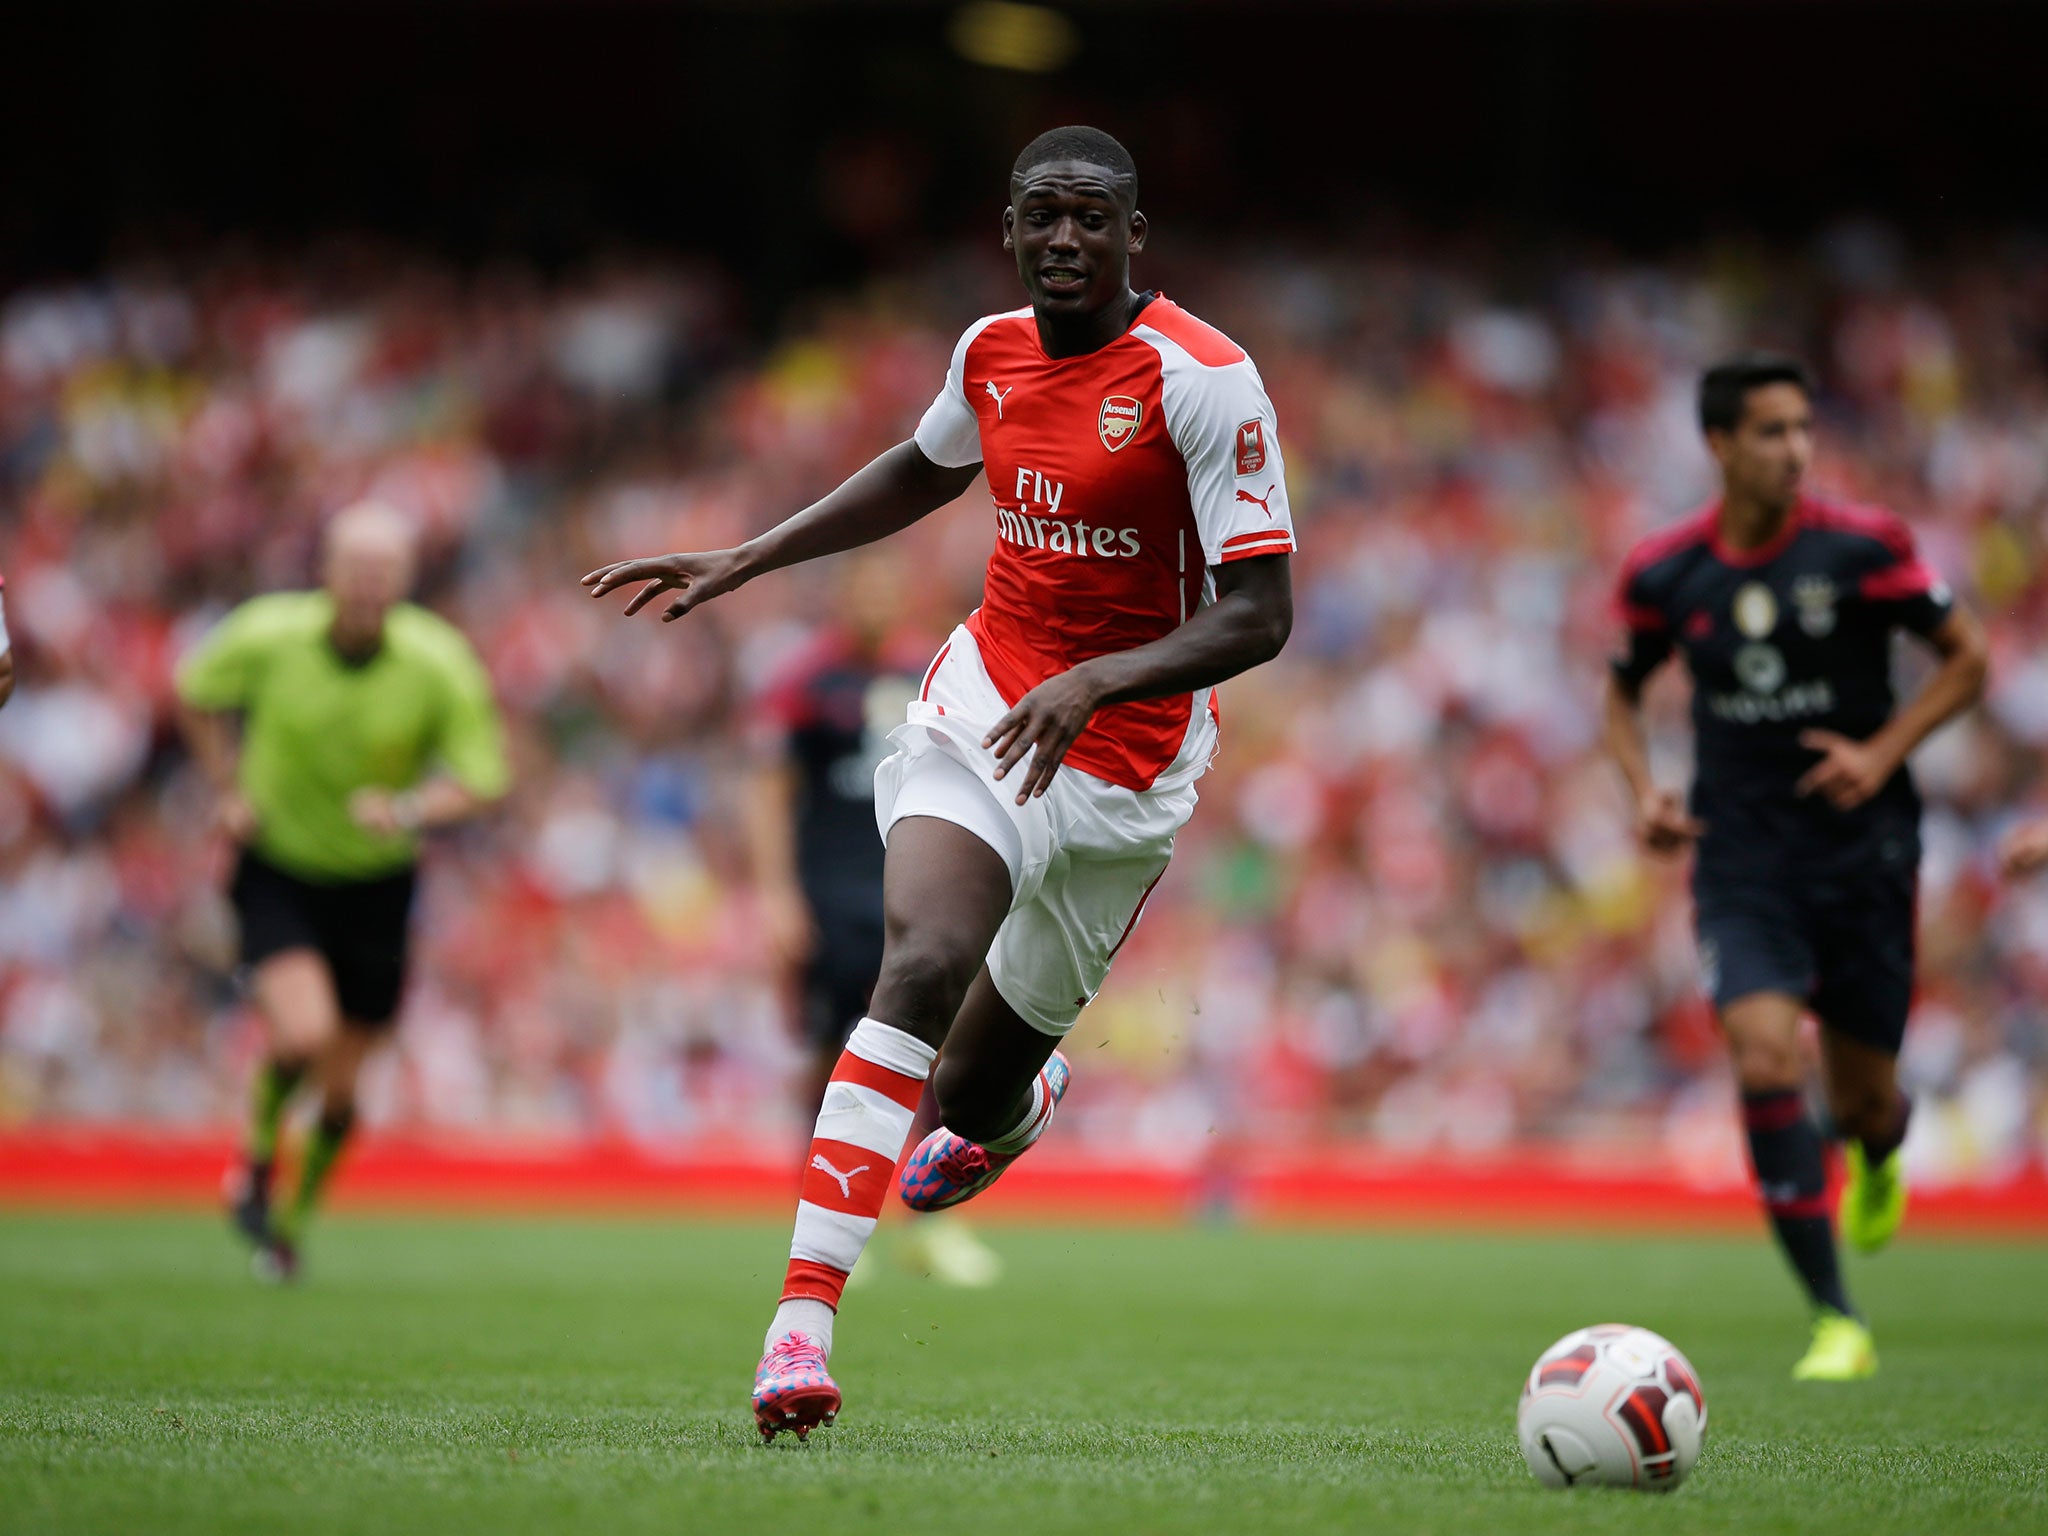 Yaya Sanogo has finally started to fulfil his potential and could start up front against City tomorrow